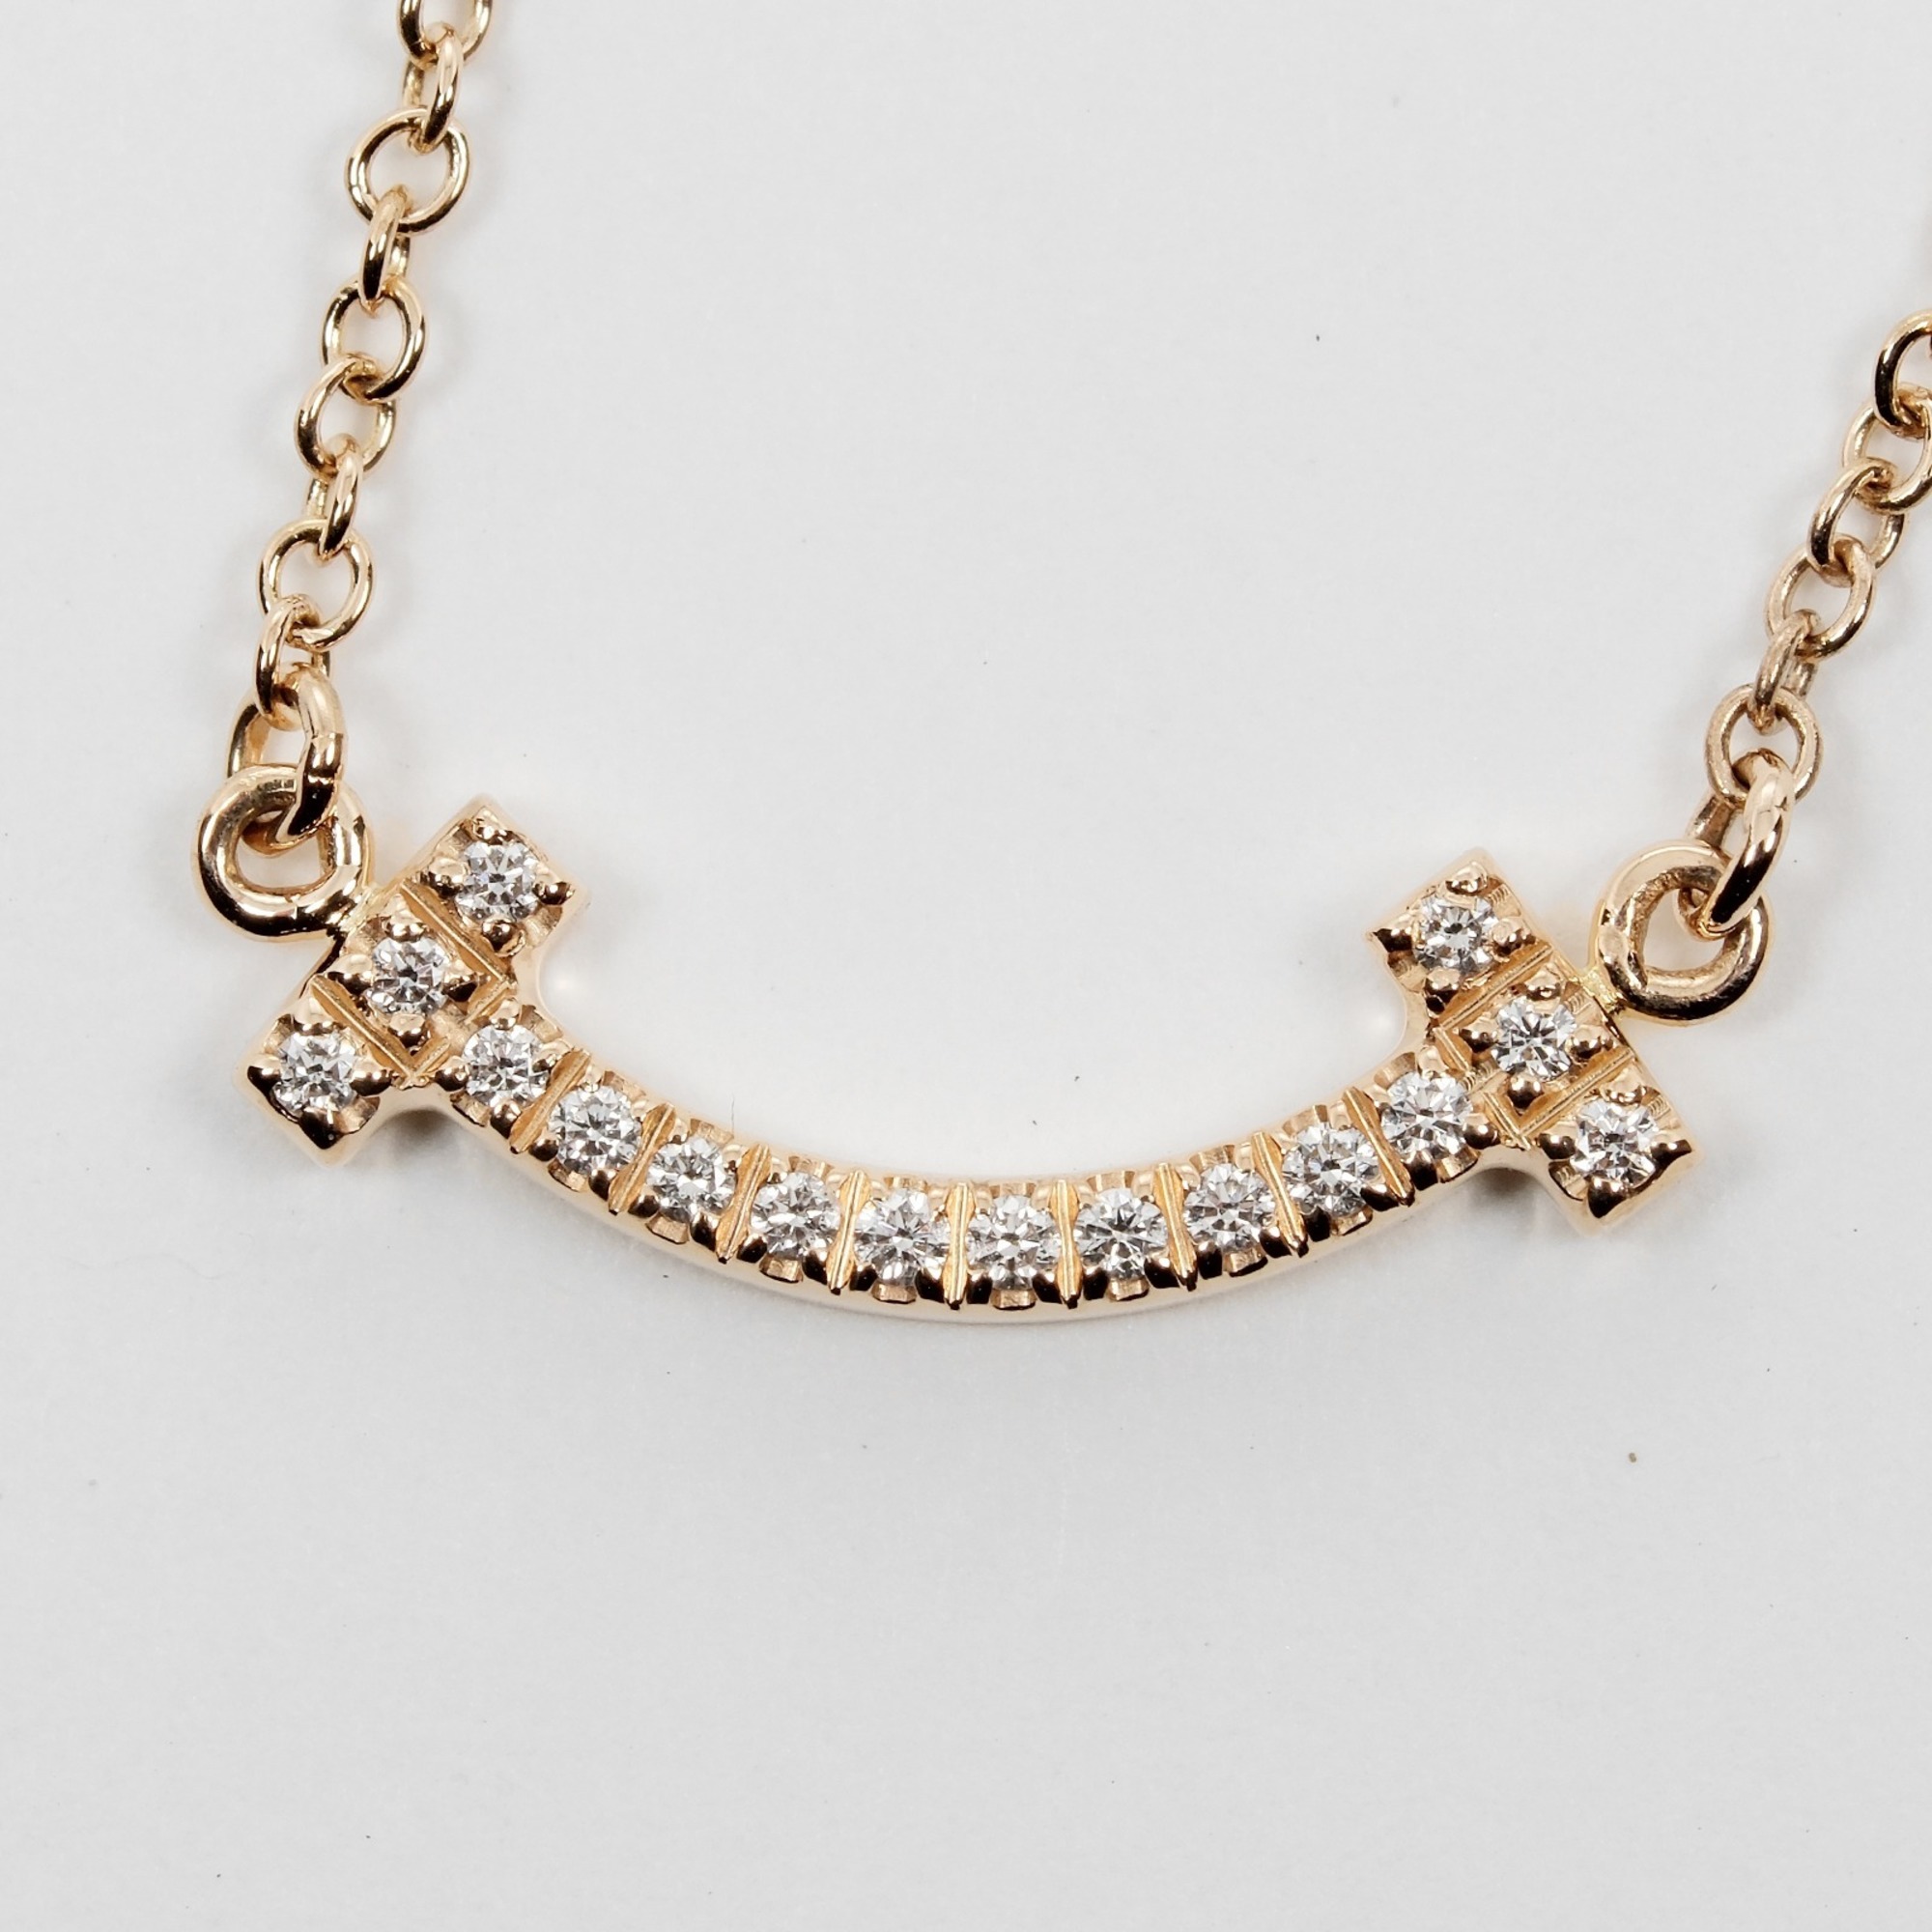 Tiffany & Co. T Smile Necklace, K18 PG Pink Gold, Diamond, Approx. 2.7g I132124038